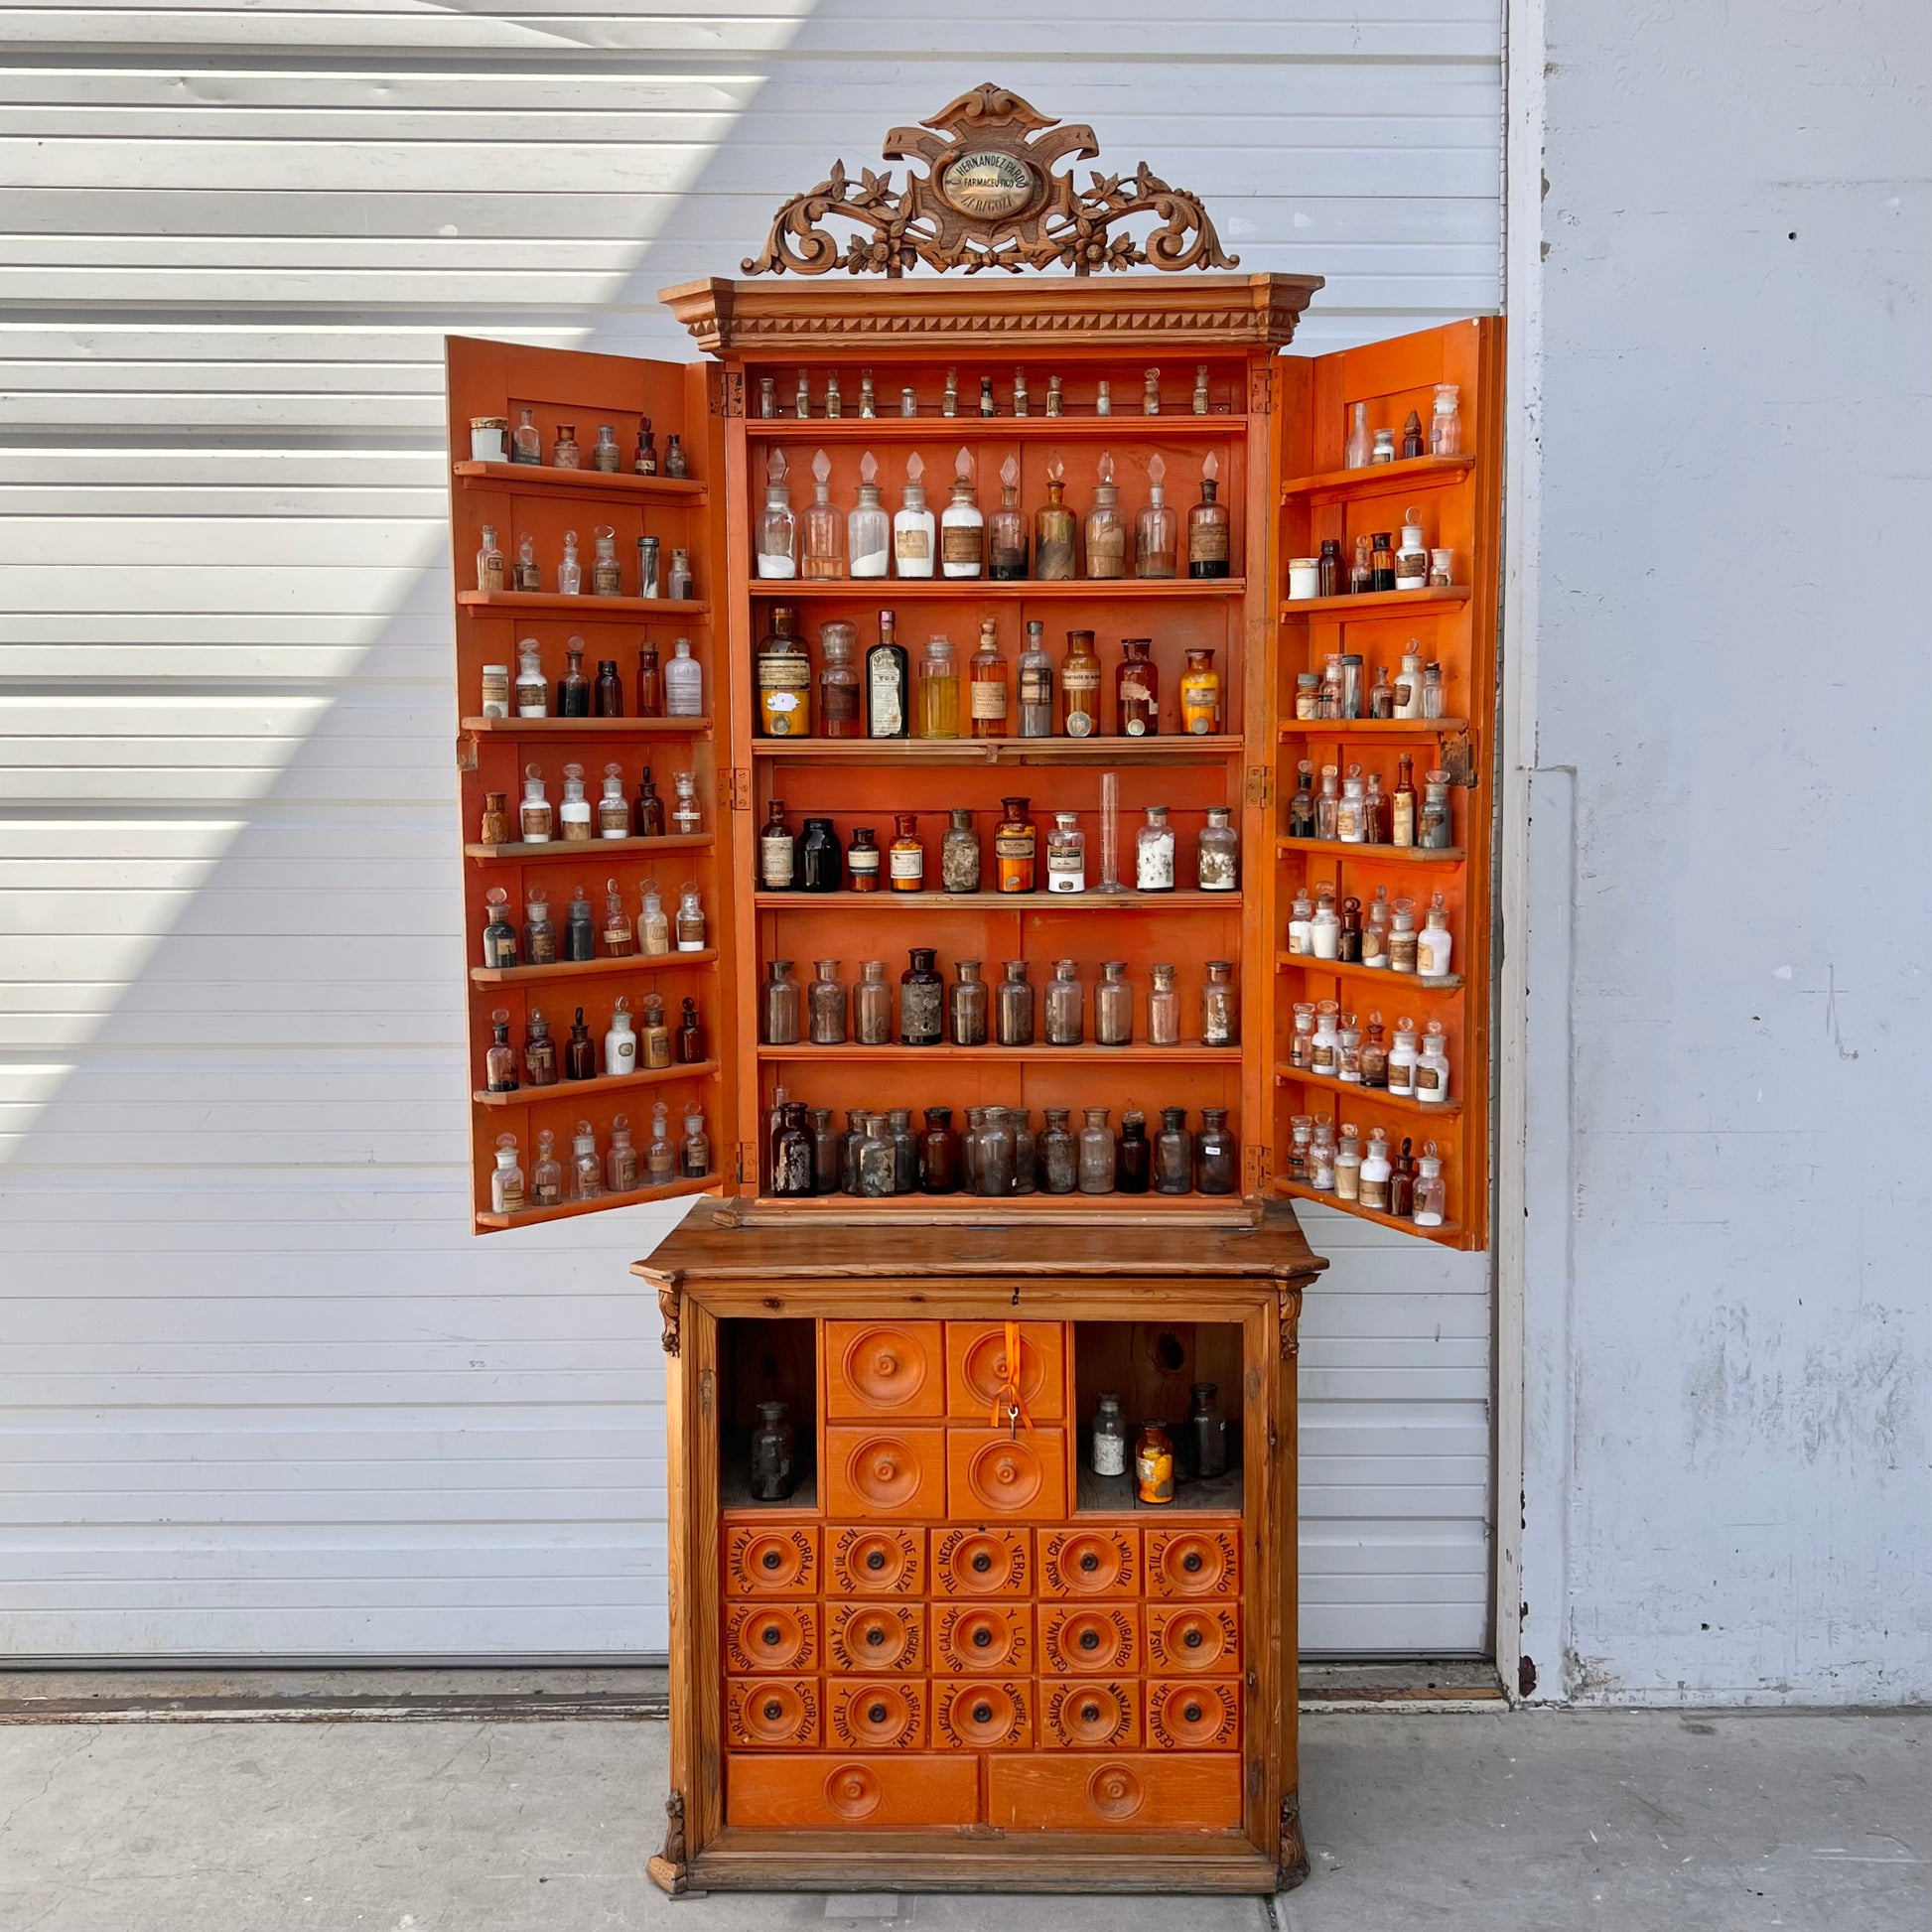 Spanish Antique Apothecary Cabinet, ca. 1800s with Original